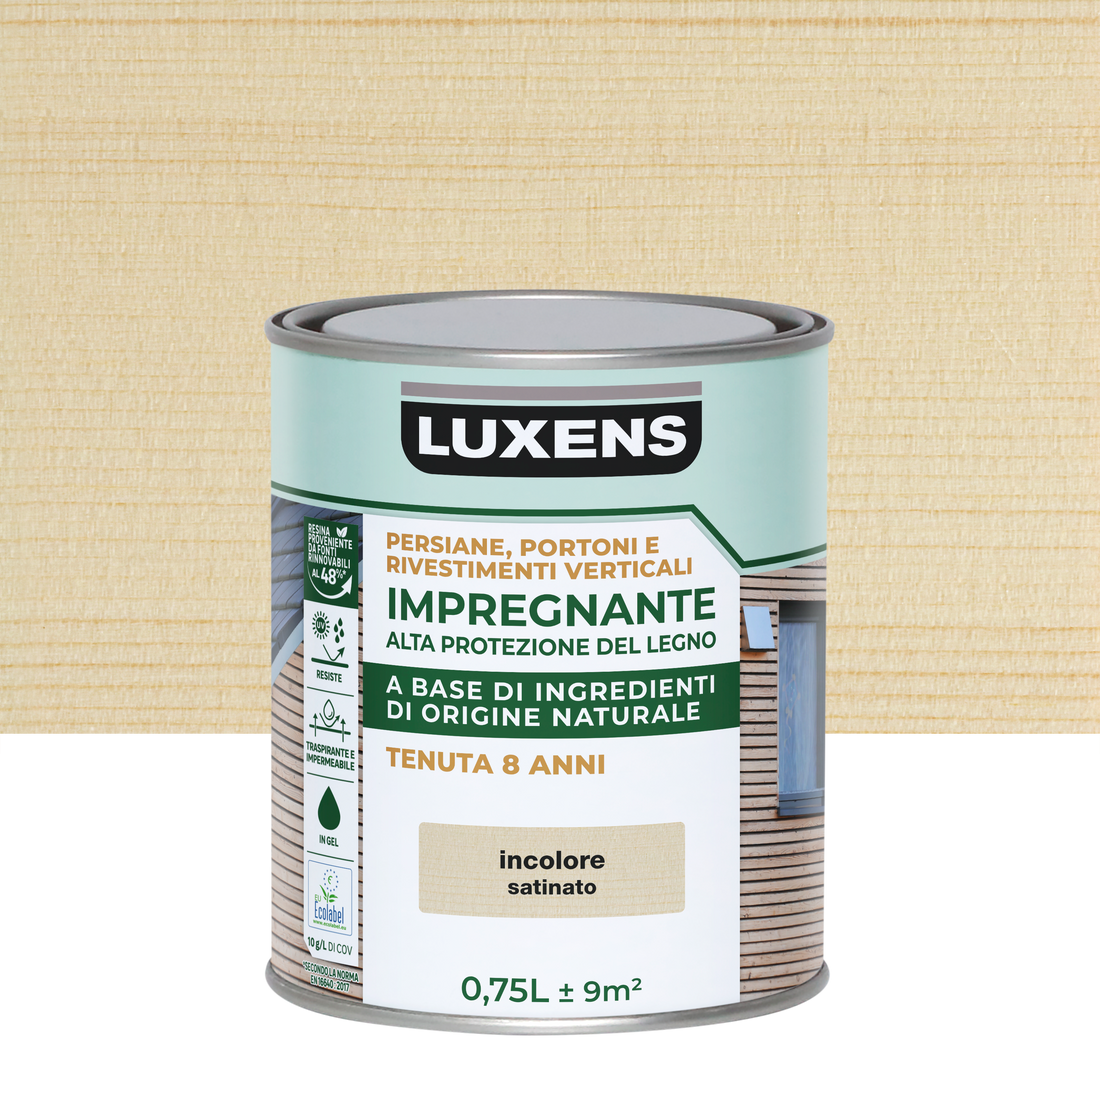 LUXENS HIGH-PROTECTION COLOURLESS BIO-BASED WOOD PRESERVATIVE 750 ML